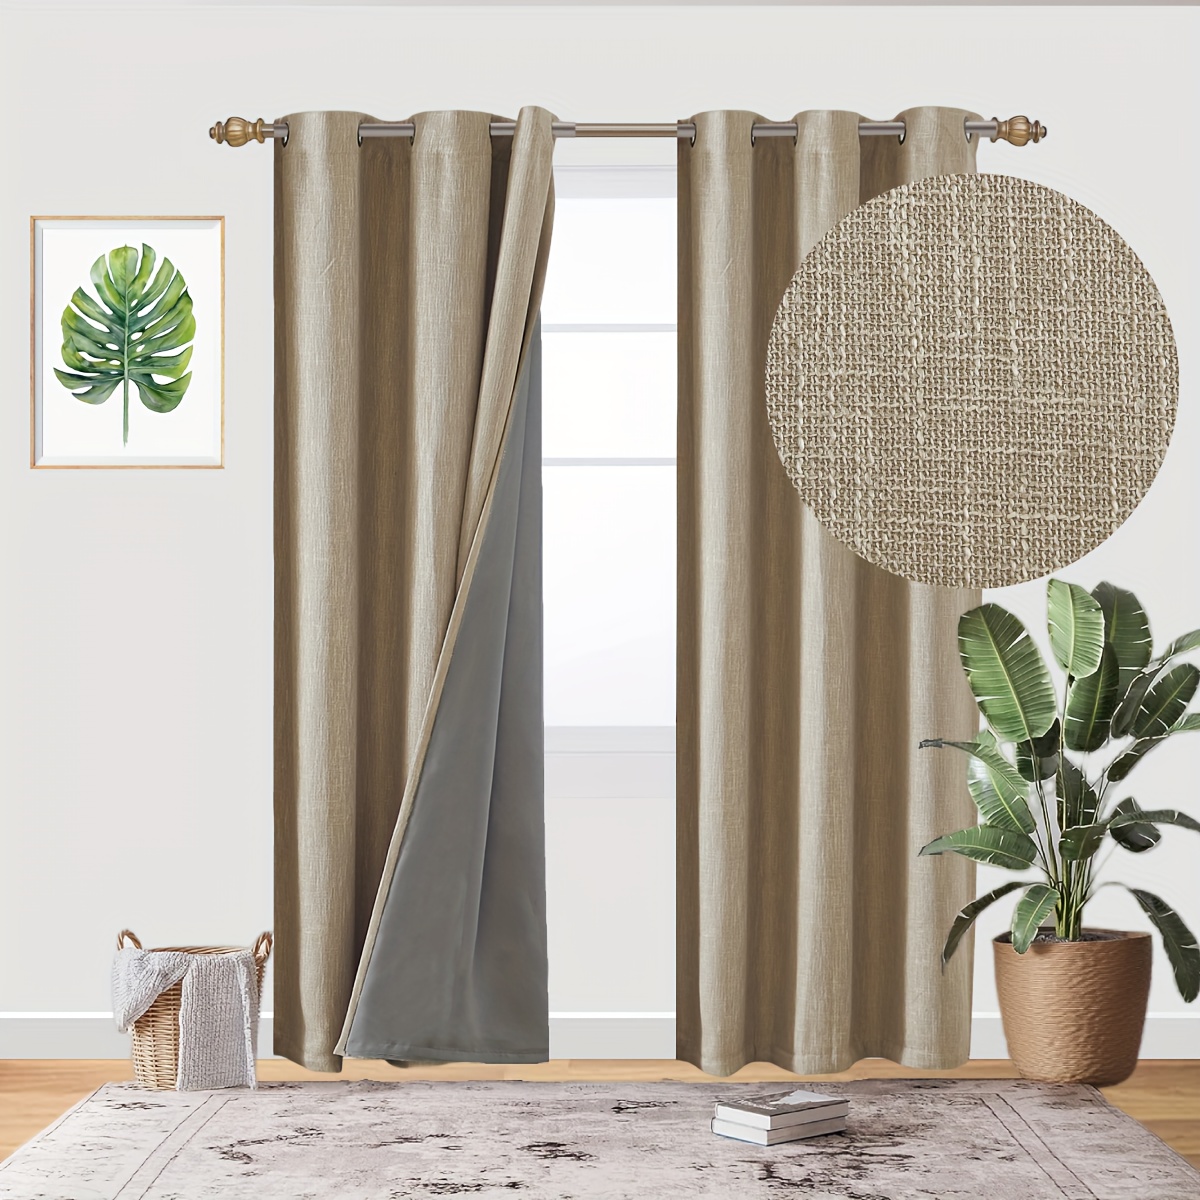 Set of 2 Heavy Weight Minimalist Blackout Curtains Thermal